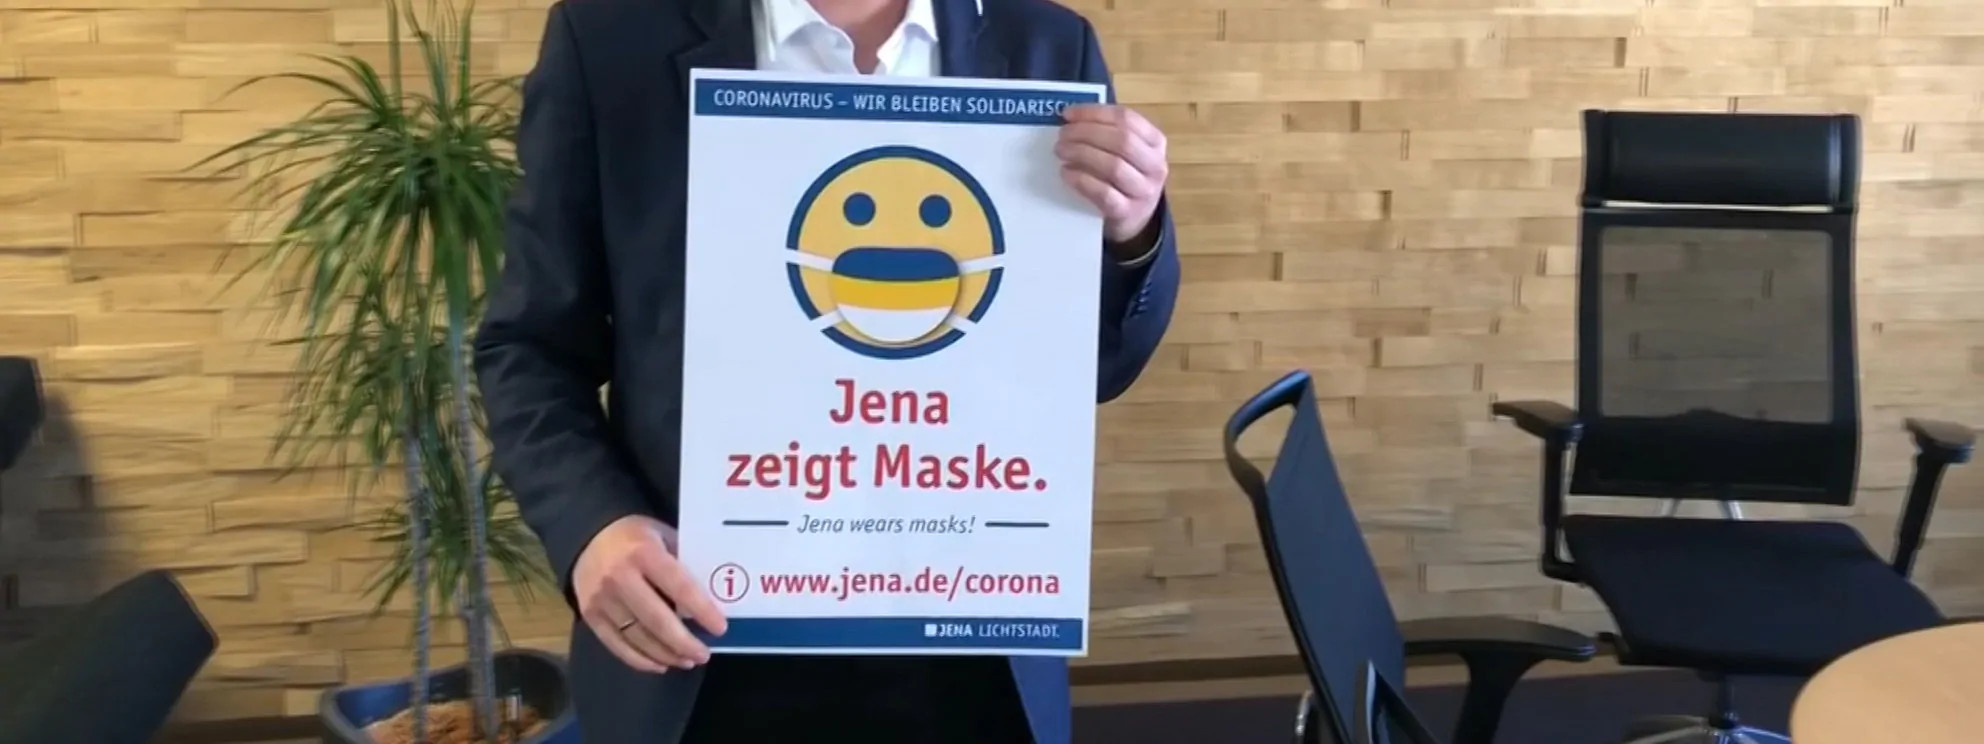 Jena was one of the first cities to introduce compulsory masks in Germany